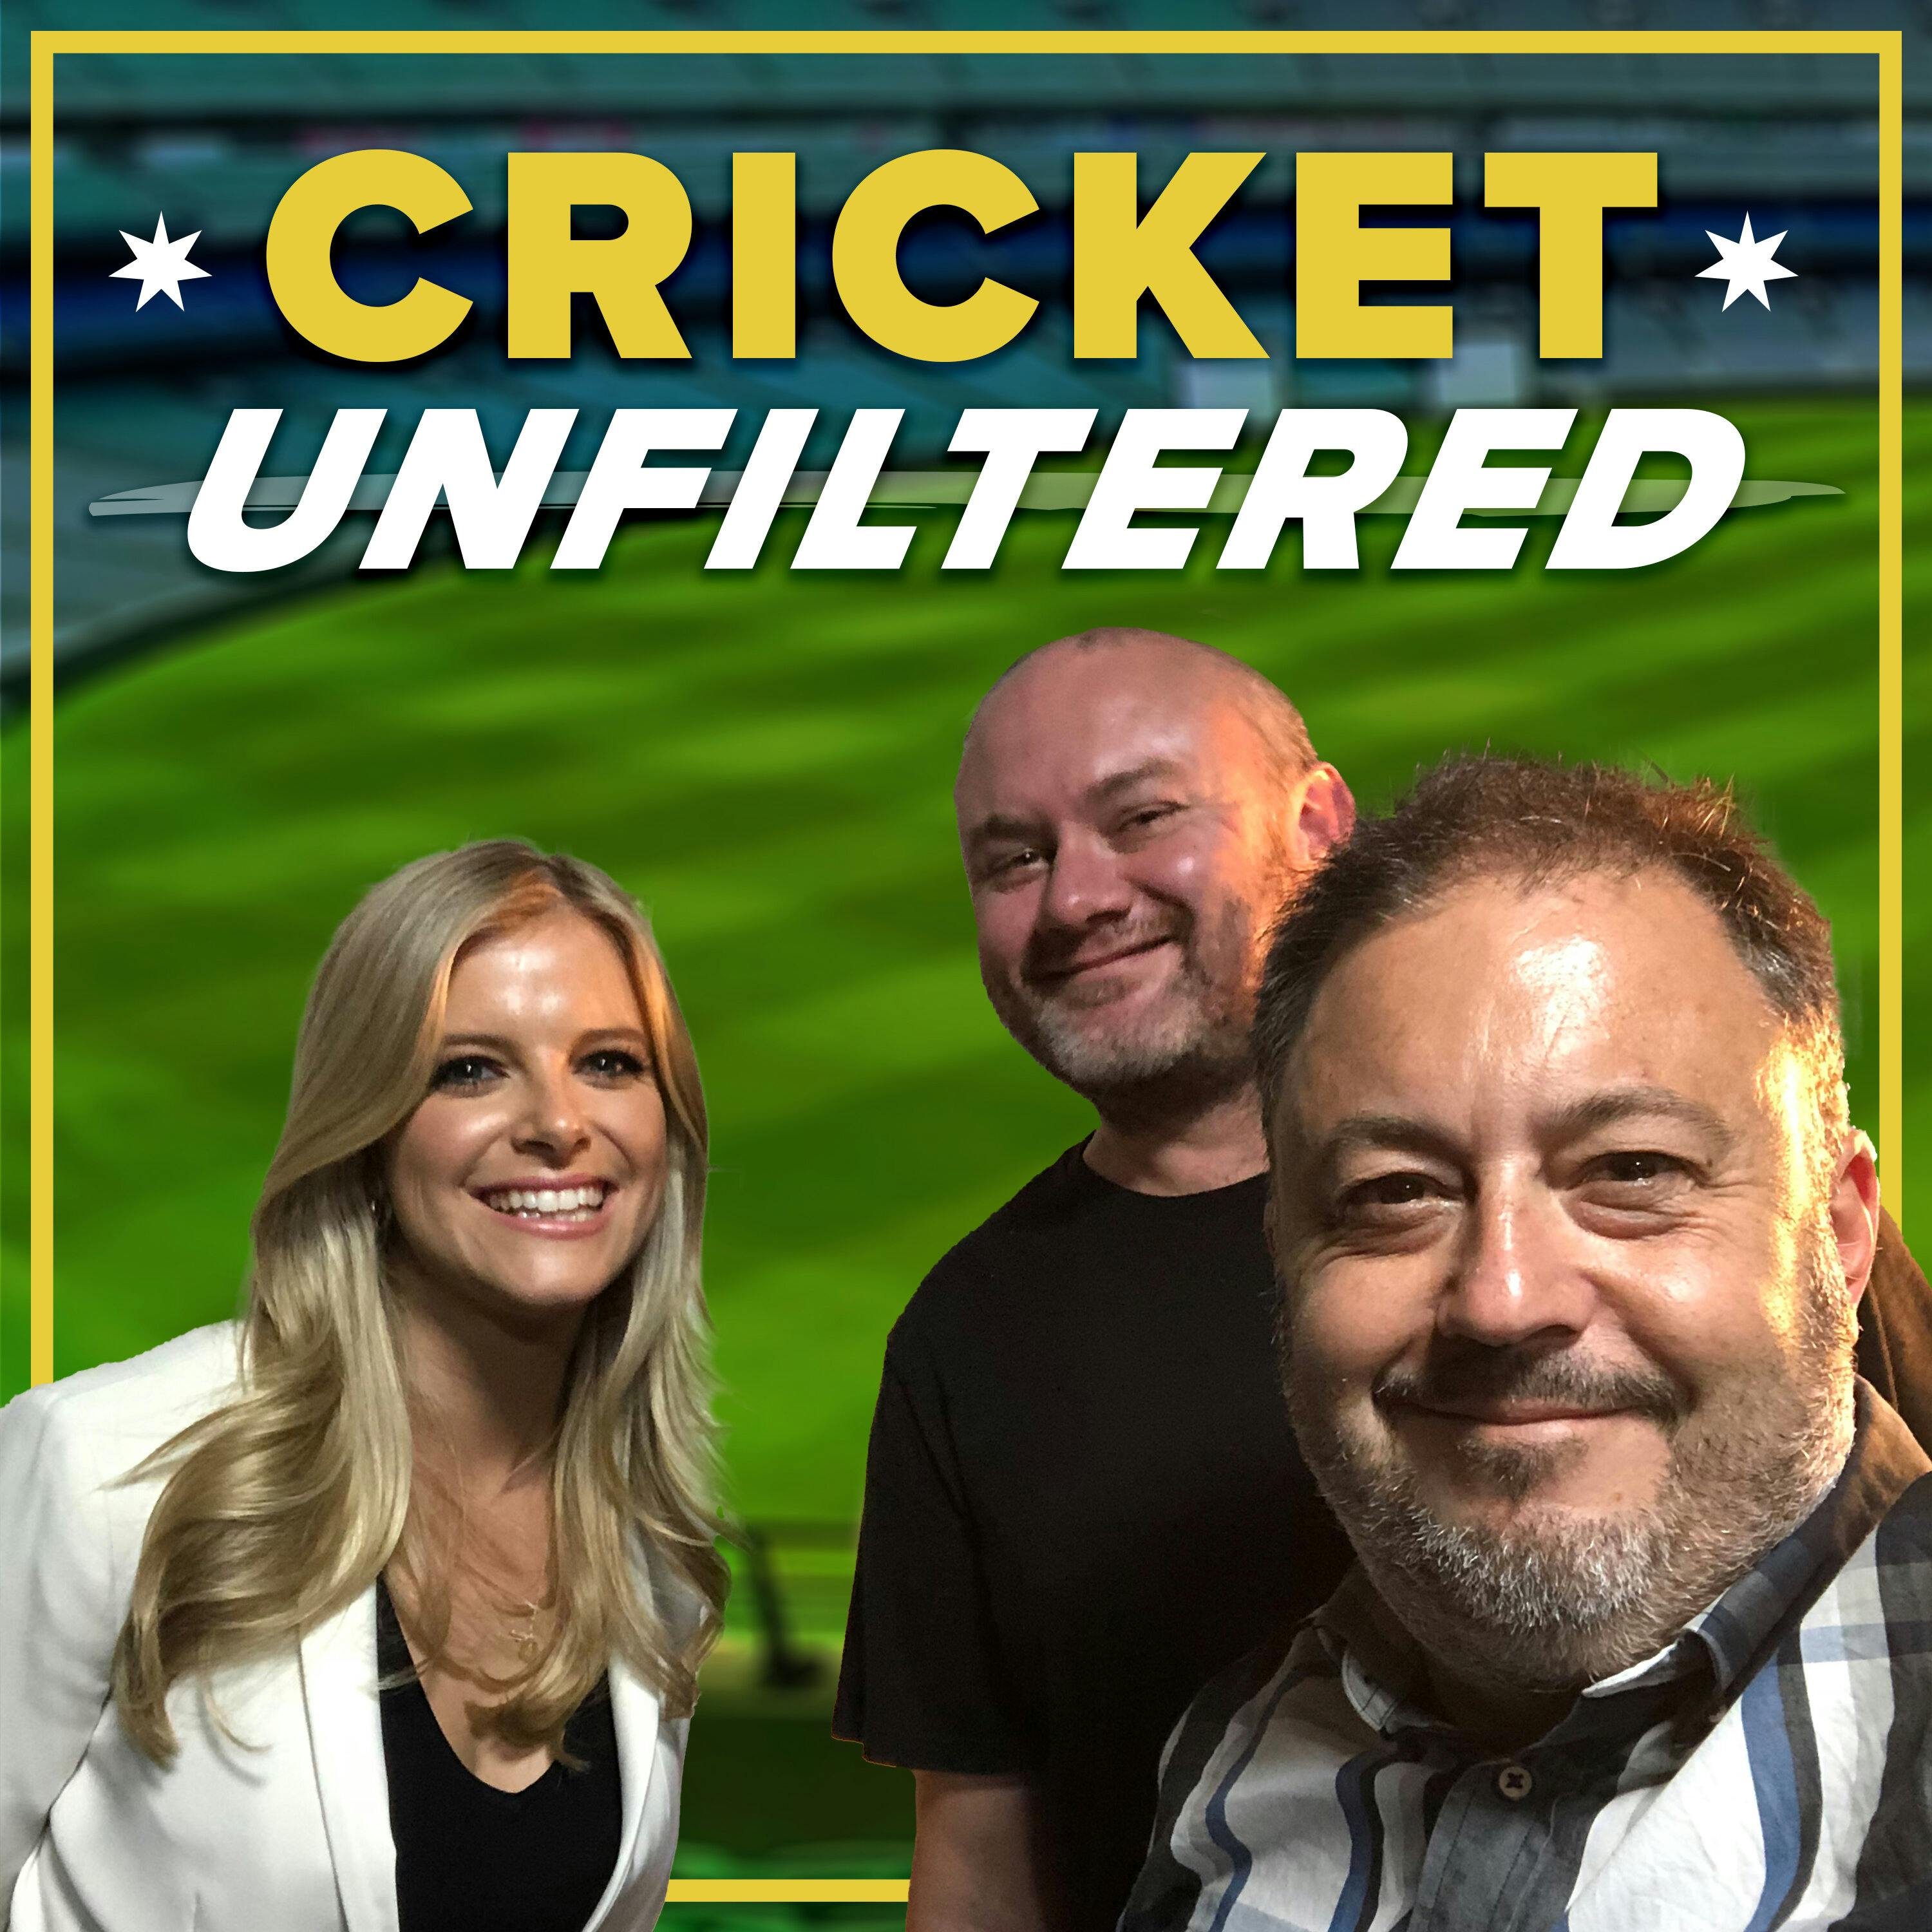 Cricket Daily July 5: Subscribe on the links in the show notes to get ALL 5 SHOWS A WEEK FOR FREE